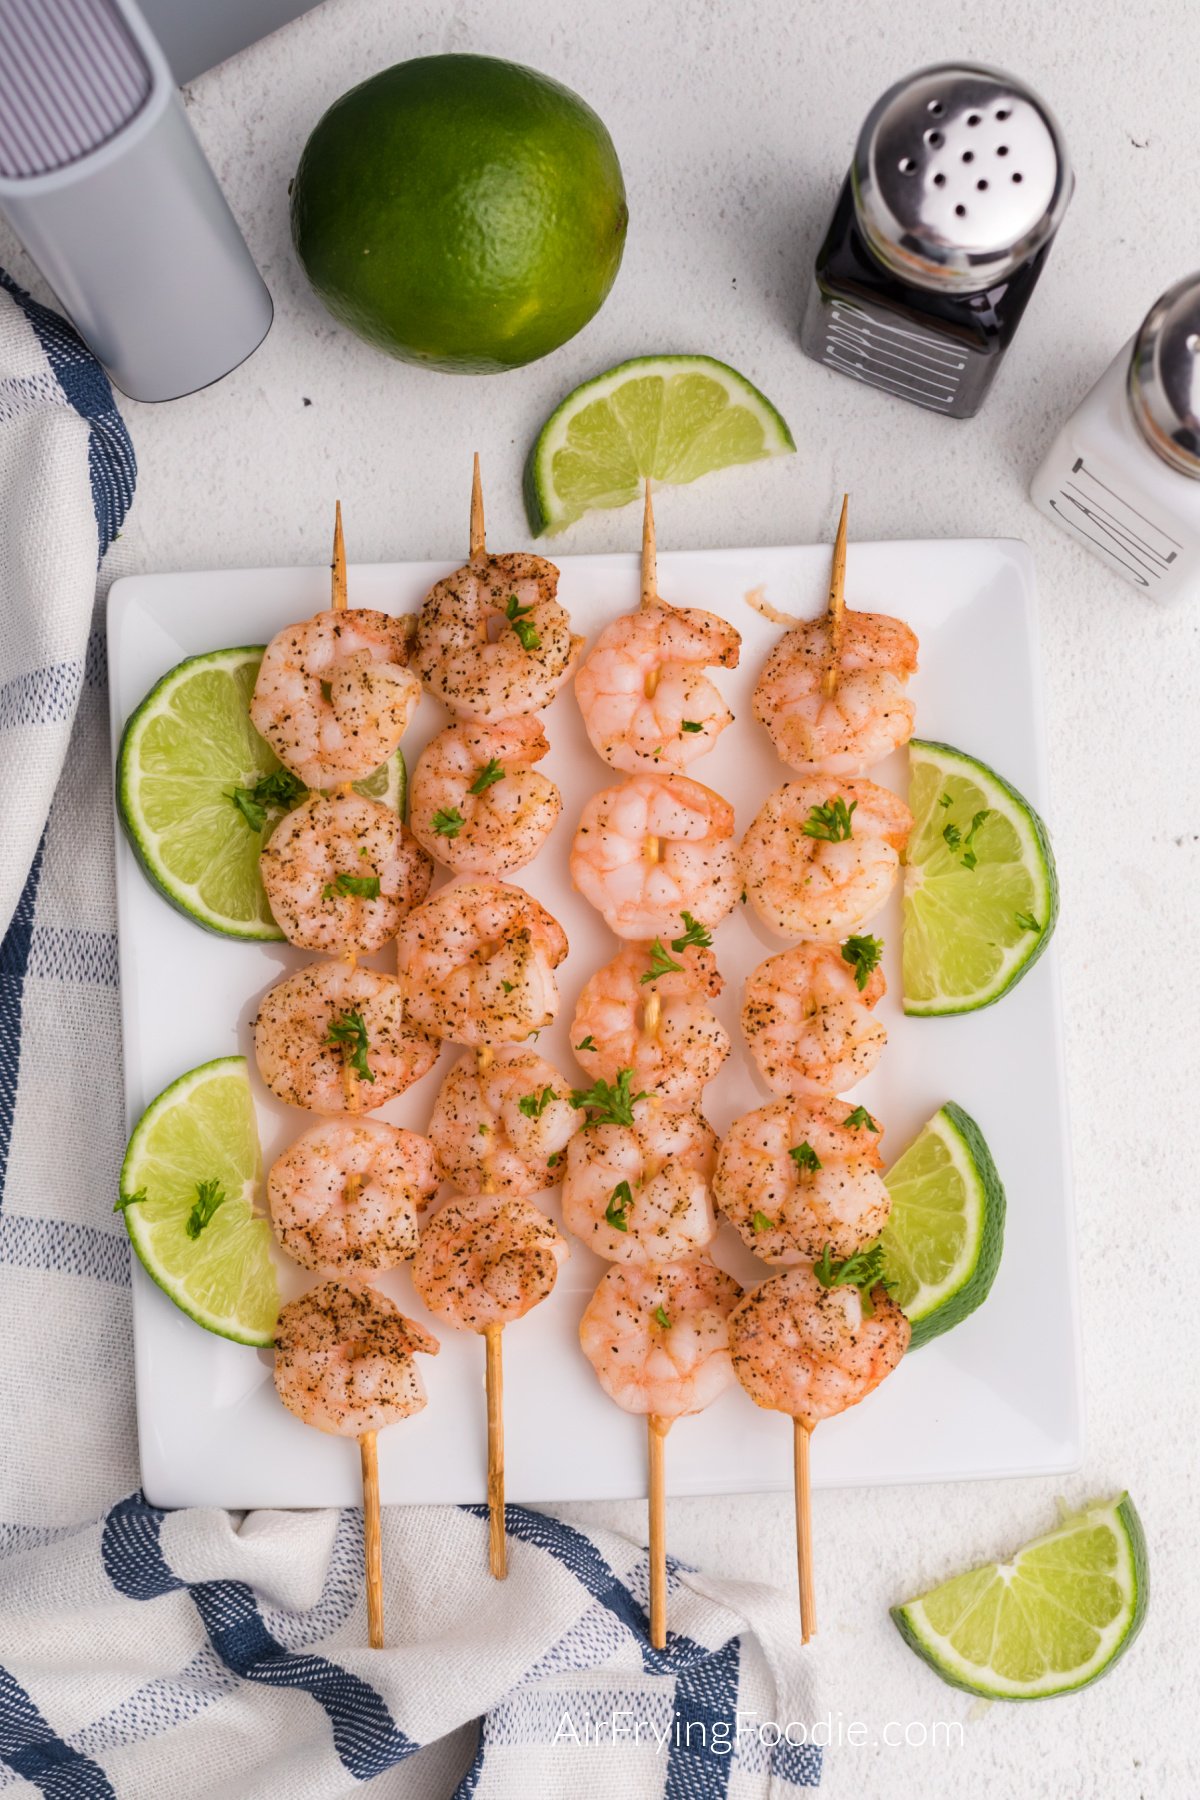 Shrimp skewers made in the air fryer and served with slices of lime.